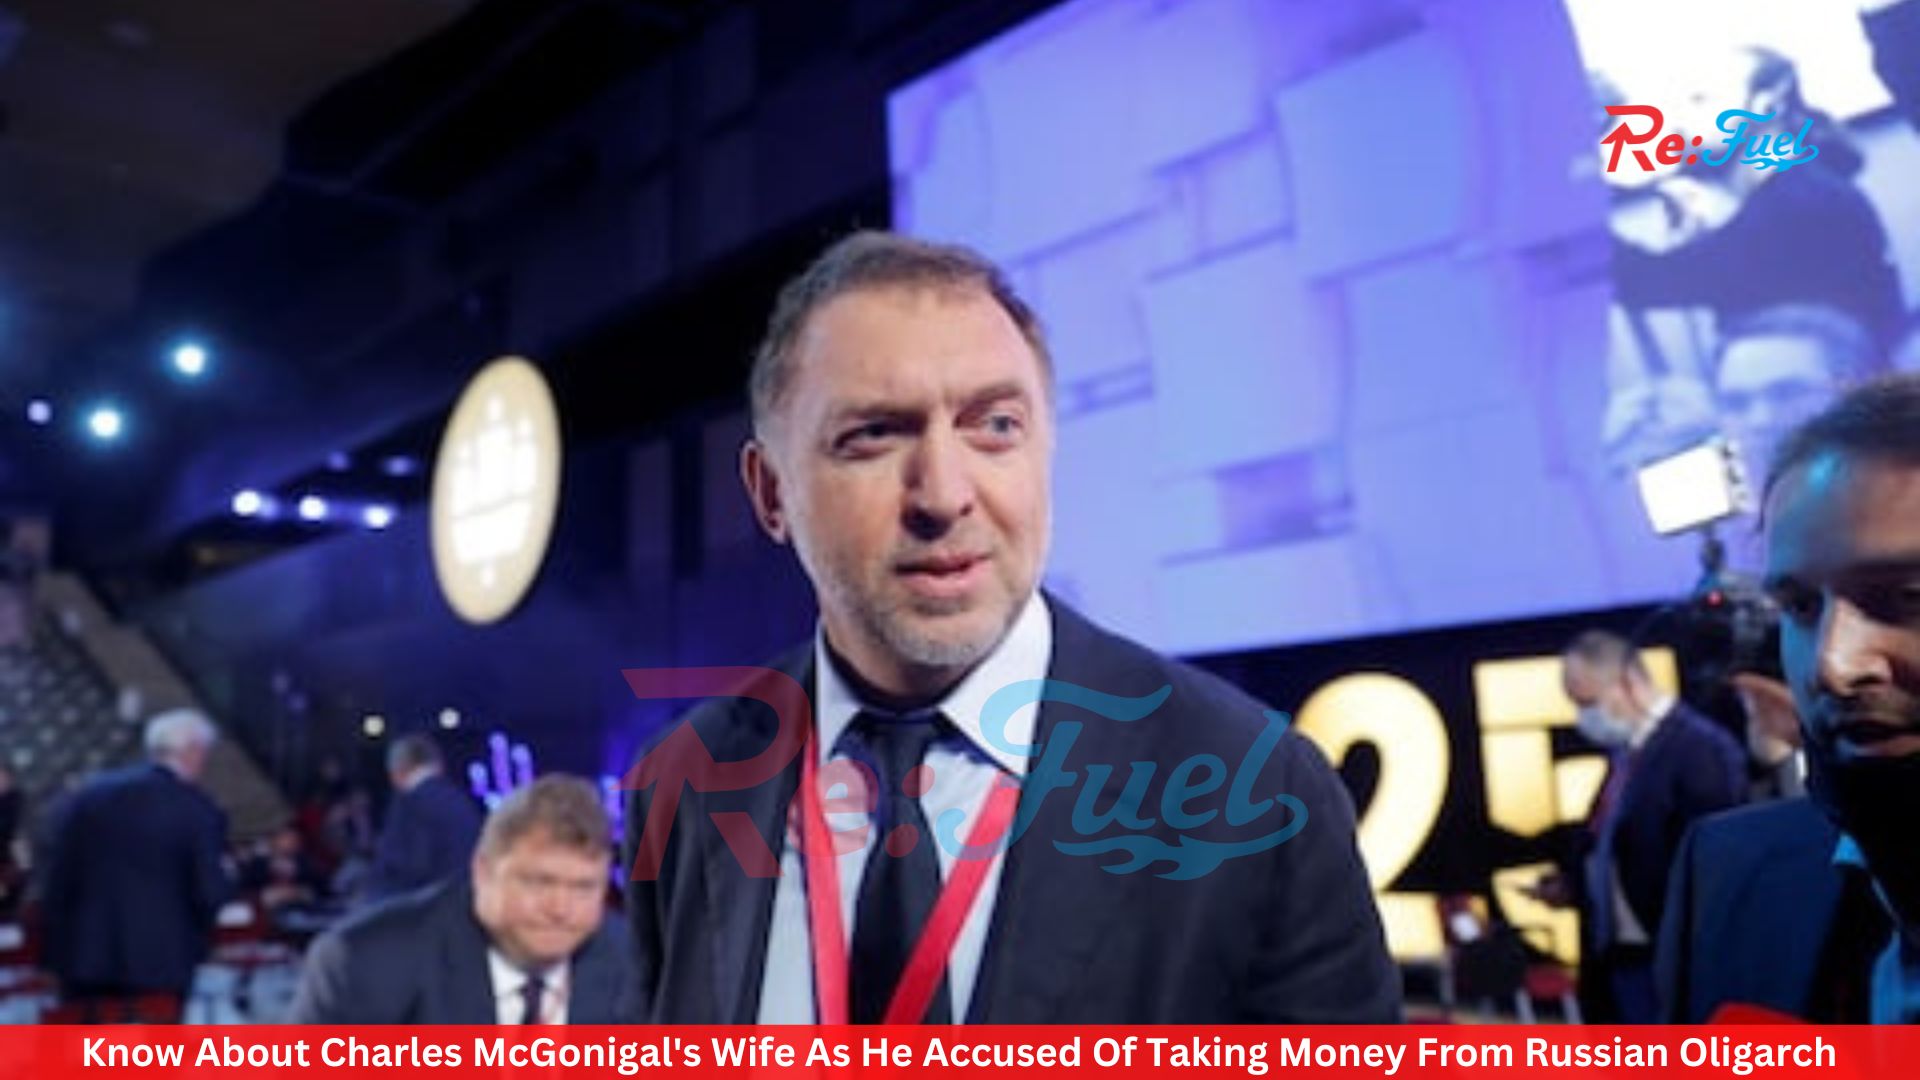 Know About Charles McGonigal's Wife As He Accused Of Taking Money From Russian Oligarch